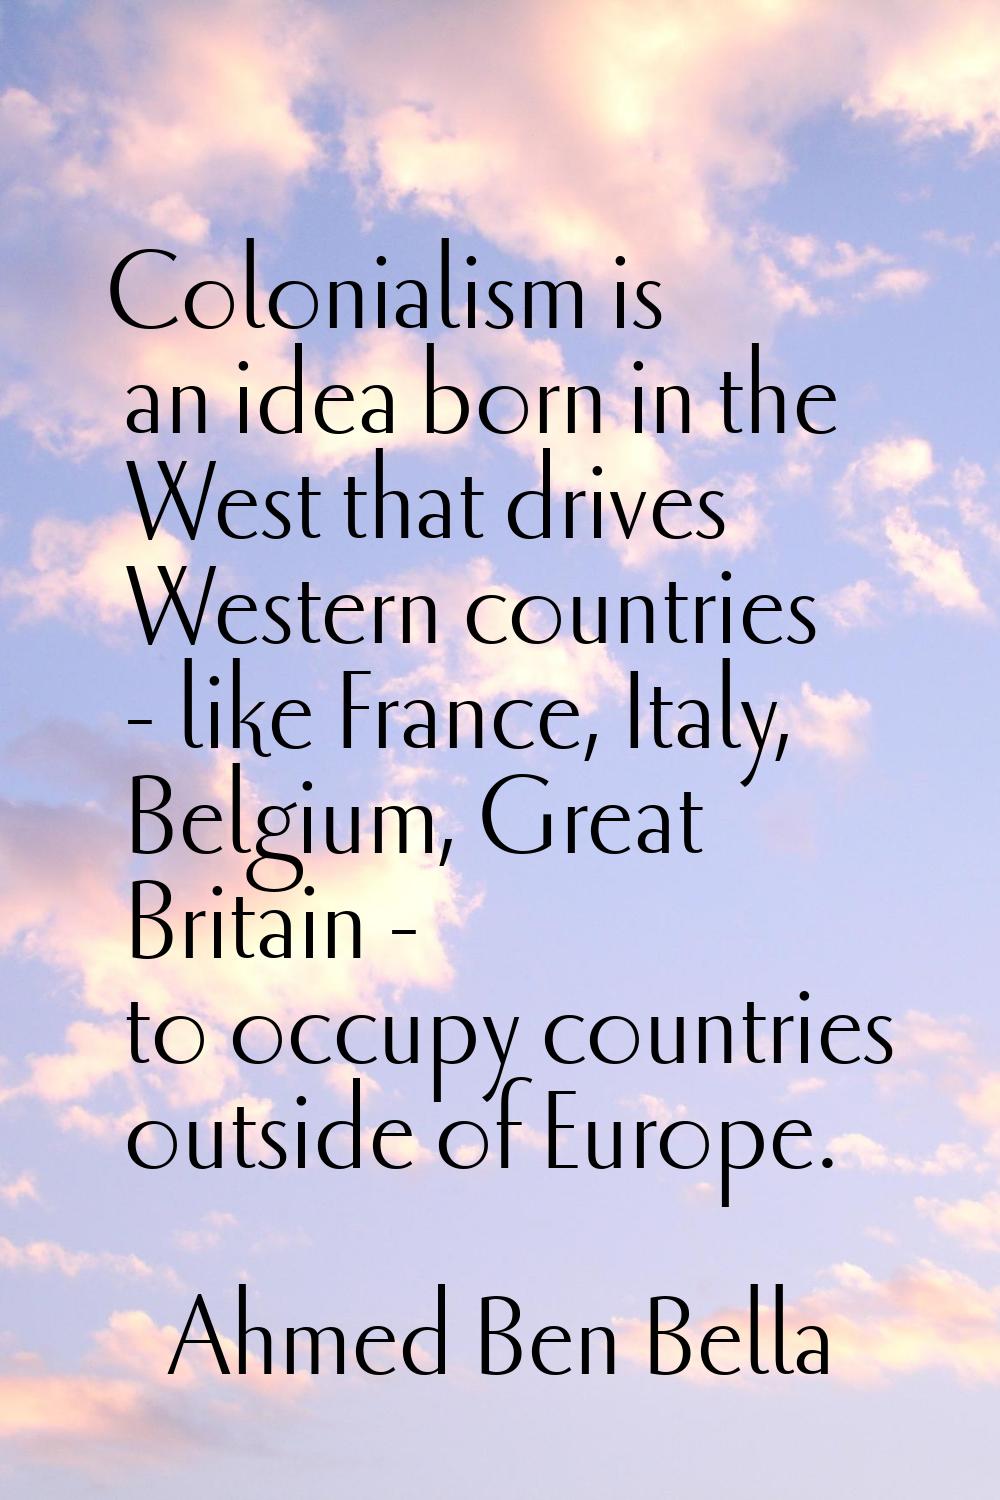 Colonialism is an idea born in the West that drives Western countries - like France, Italy, Belgium